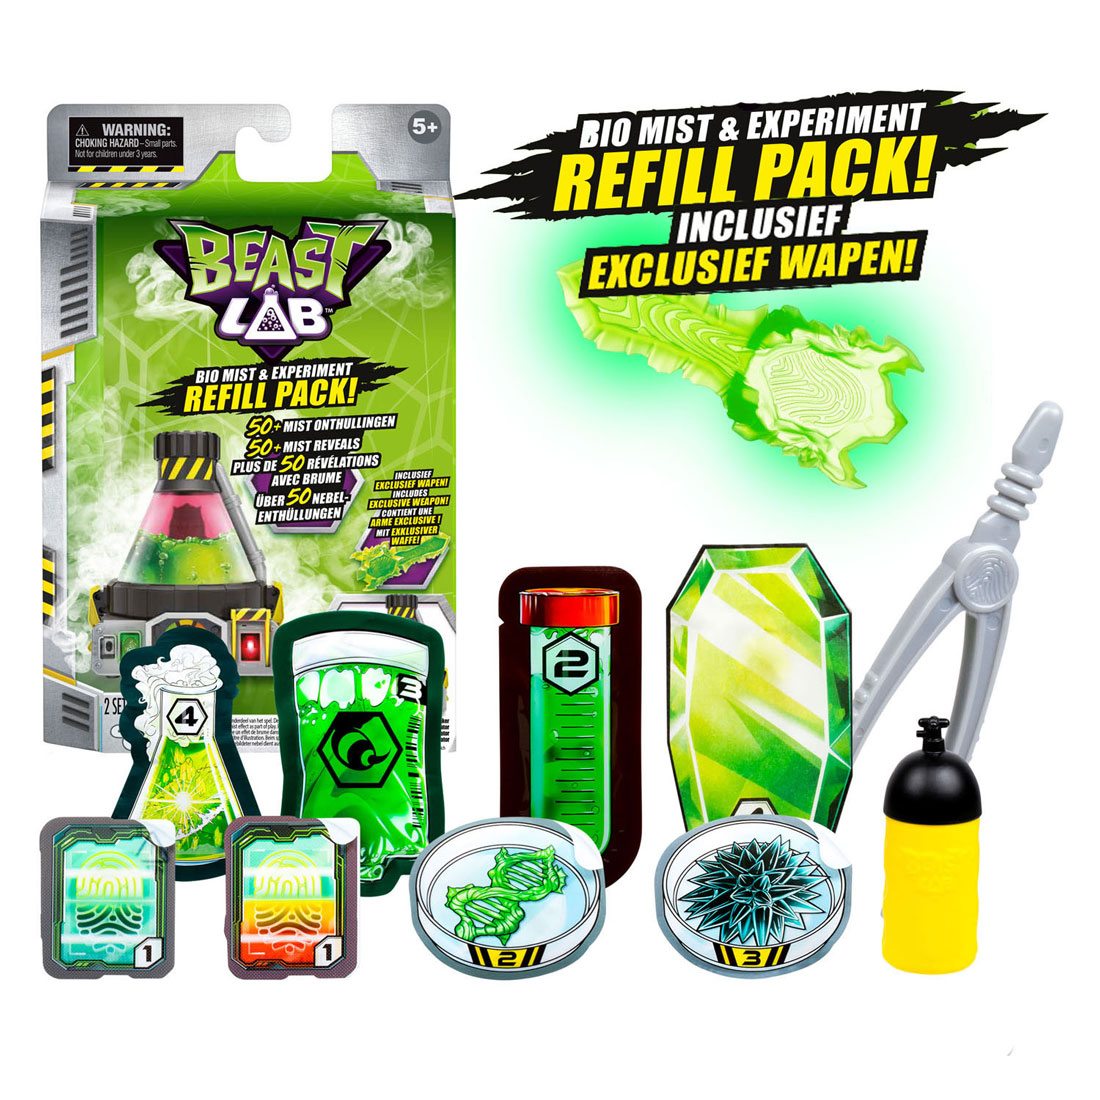 Beast Lab Bio Mist Refill Pack, Includes 2 Experiments, Weapon and